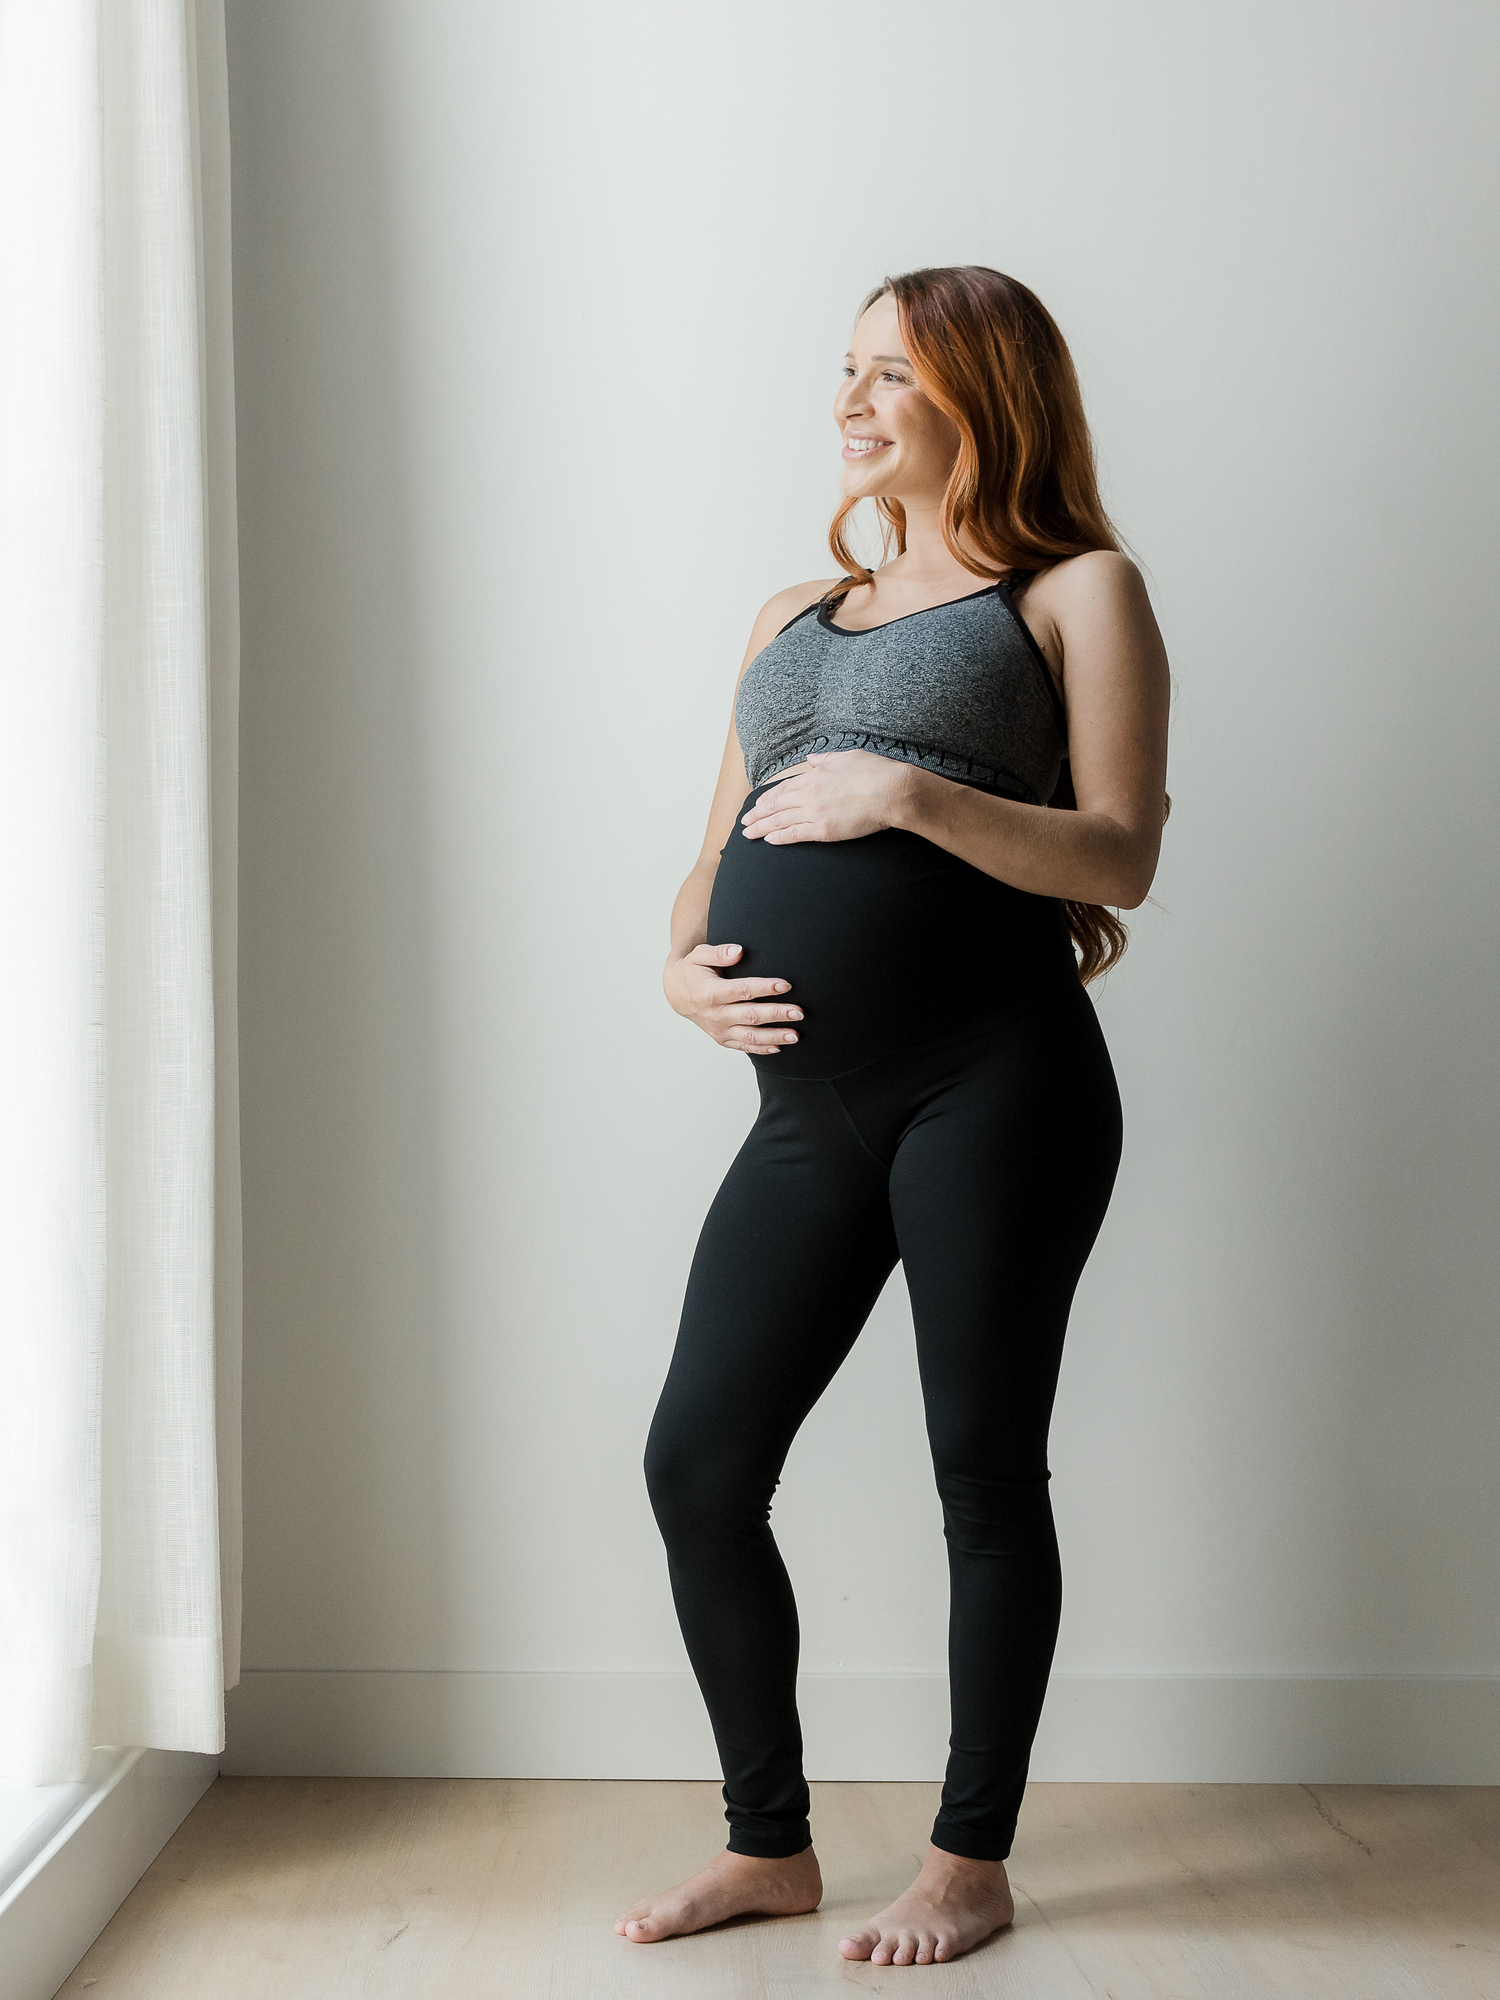 Pregnant model standing near a window holding her pregnant belly and wearing the Louisa Maternity & Postpartum Legging in Black. @model_info:Shannon is 5'8" and wearing a Small.